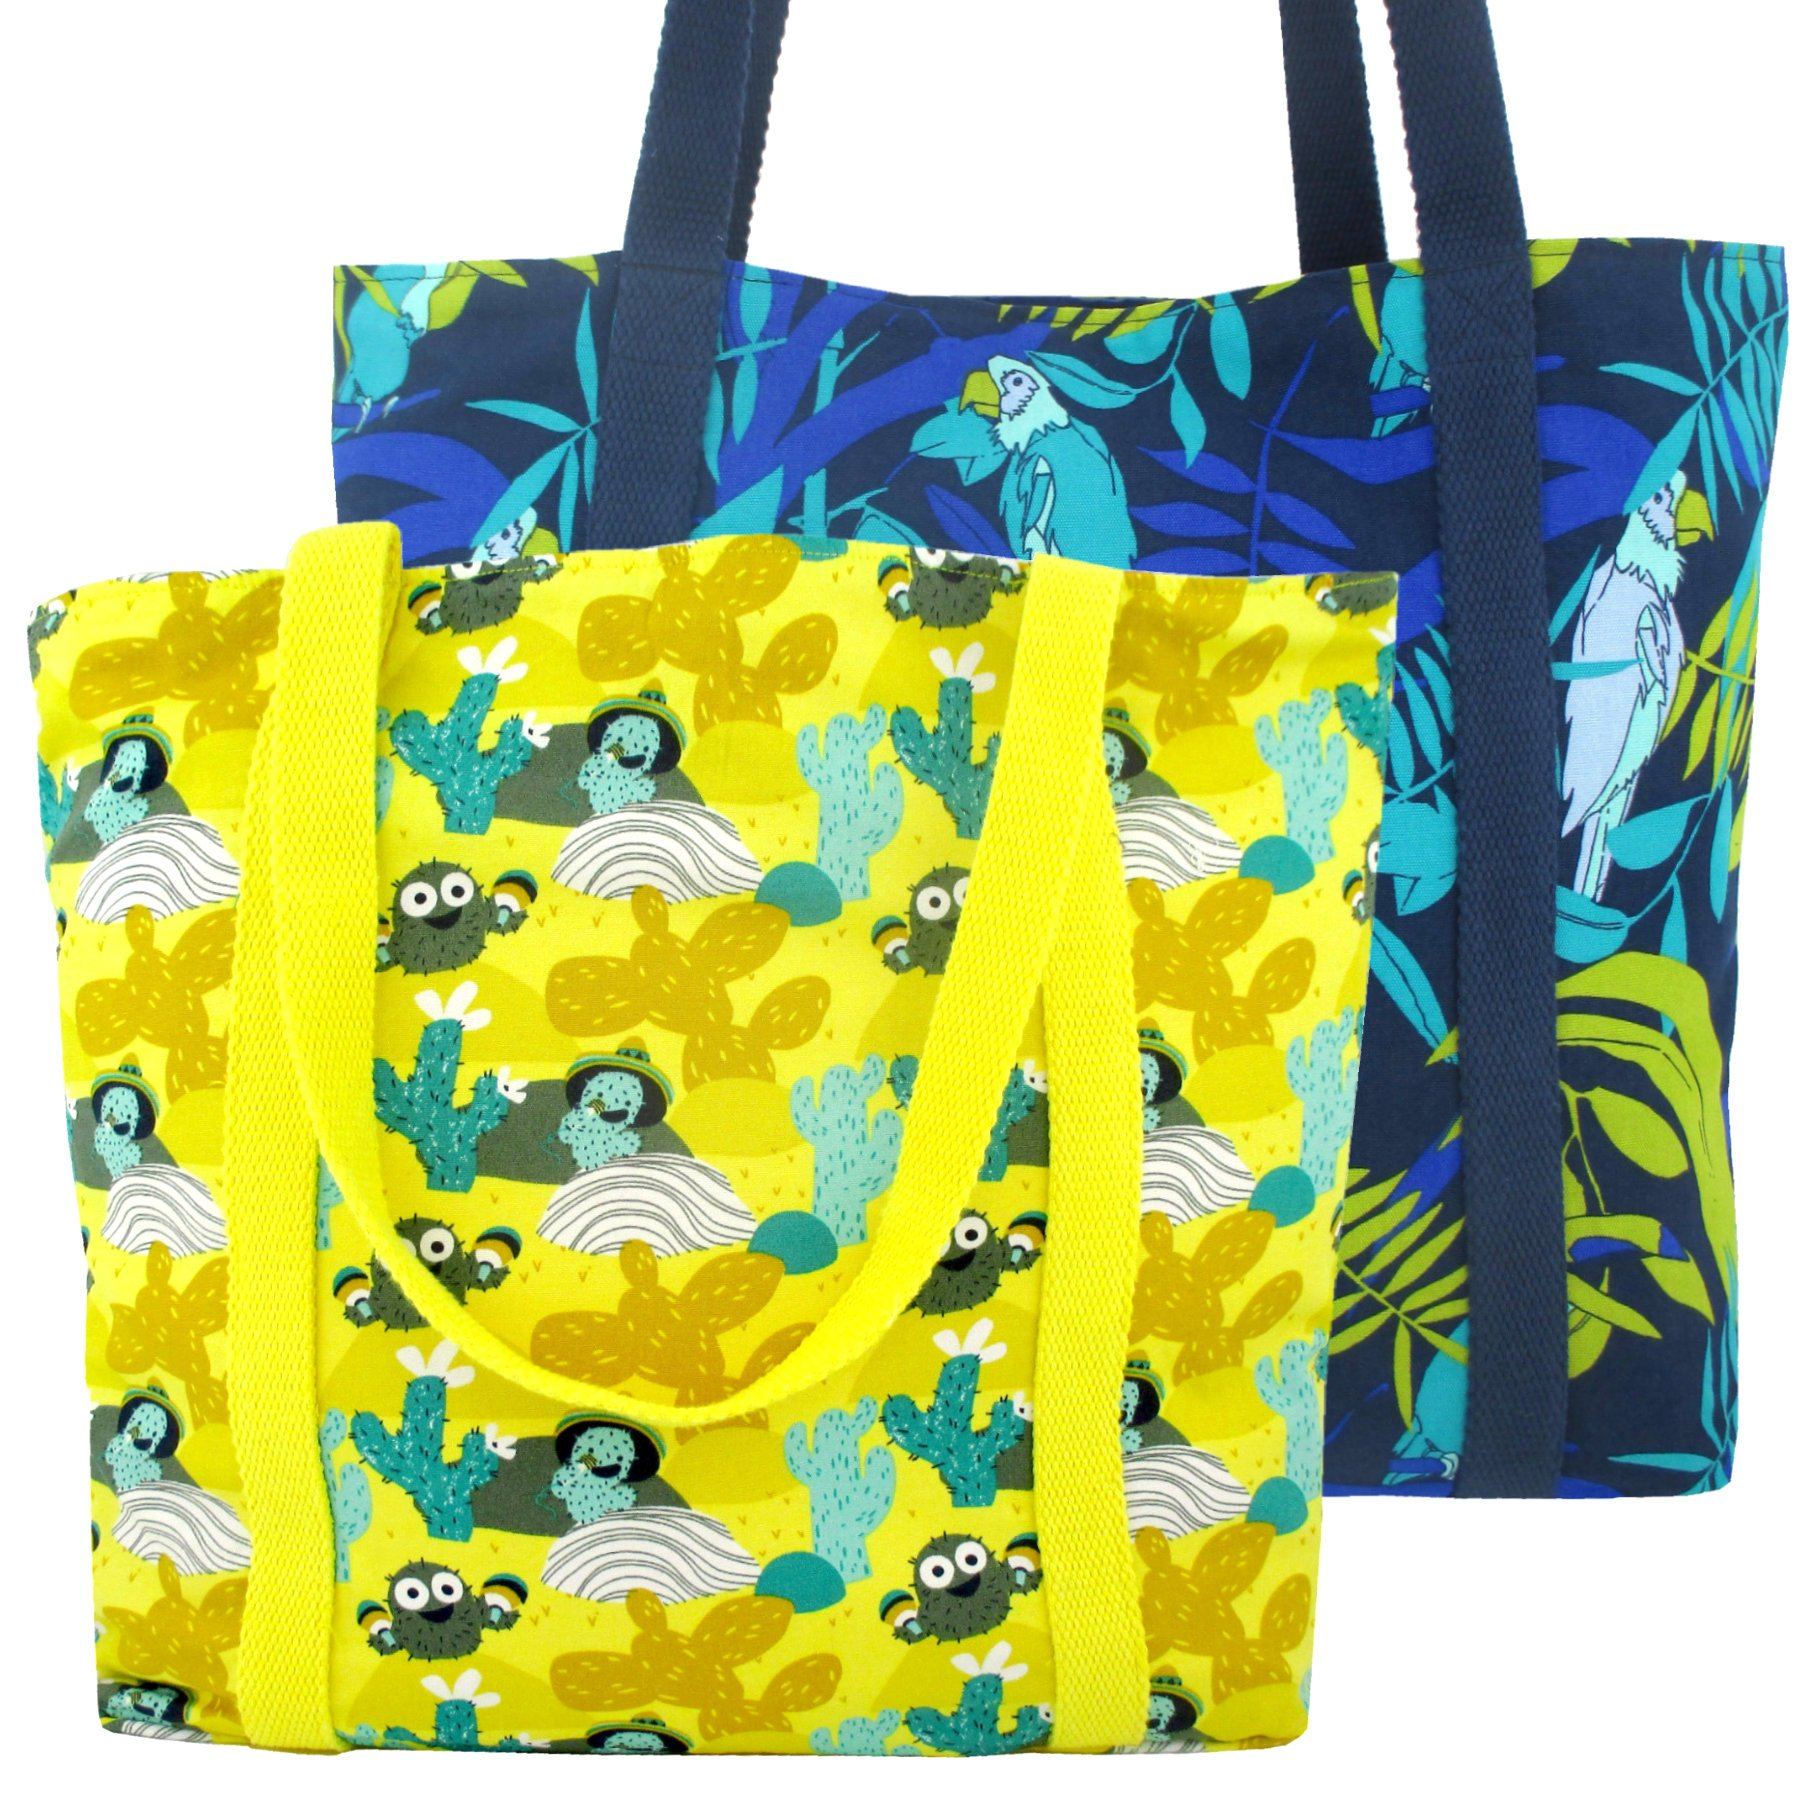 Yellow and Blue Large Shopper Totes in Colorful Animal Desert Themed Print | Pack of 2